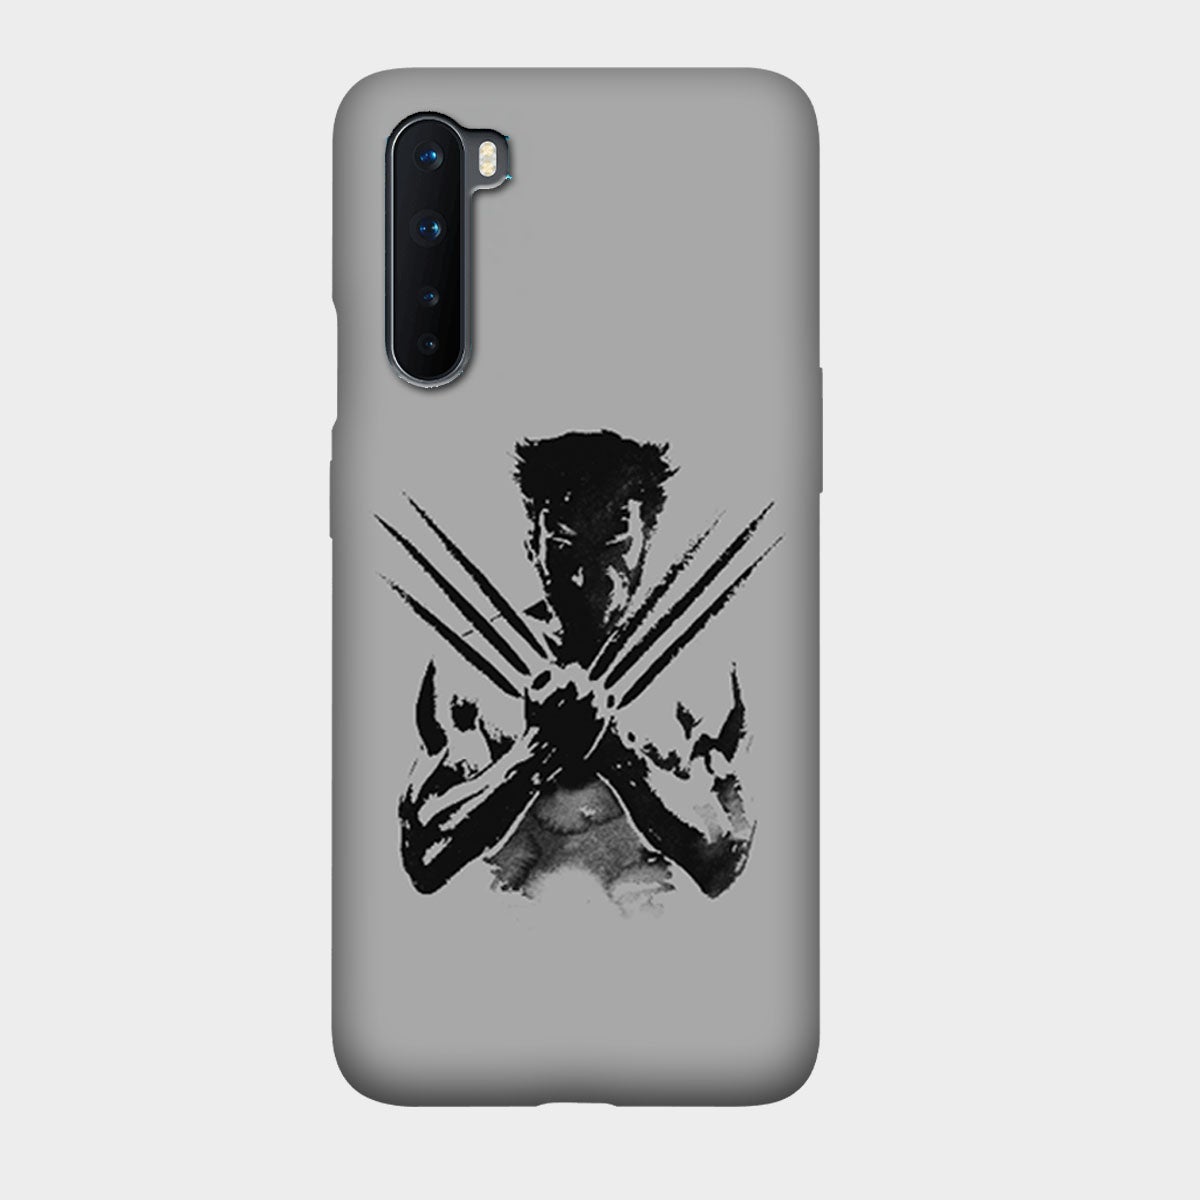 Wolverine - Mobile Phone Cover - Hard Case - OnePlus